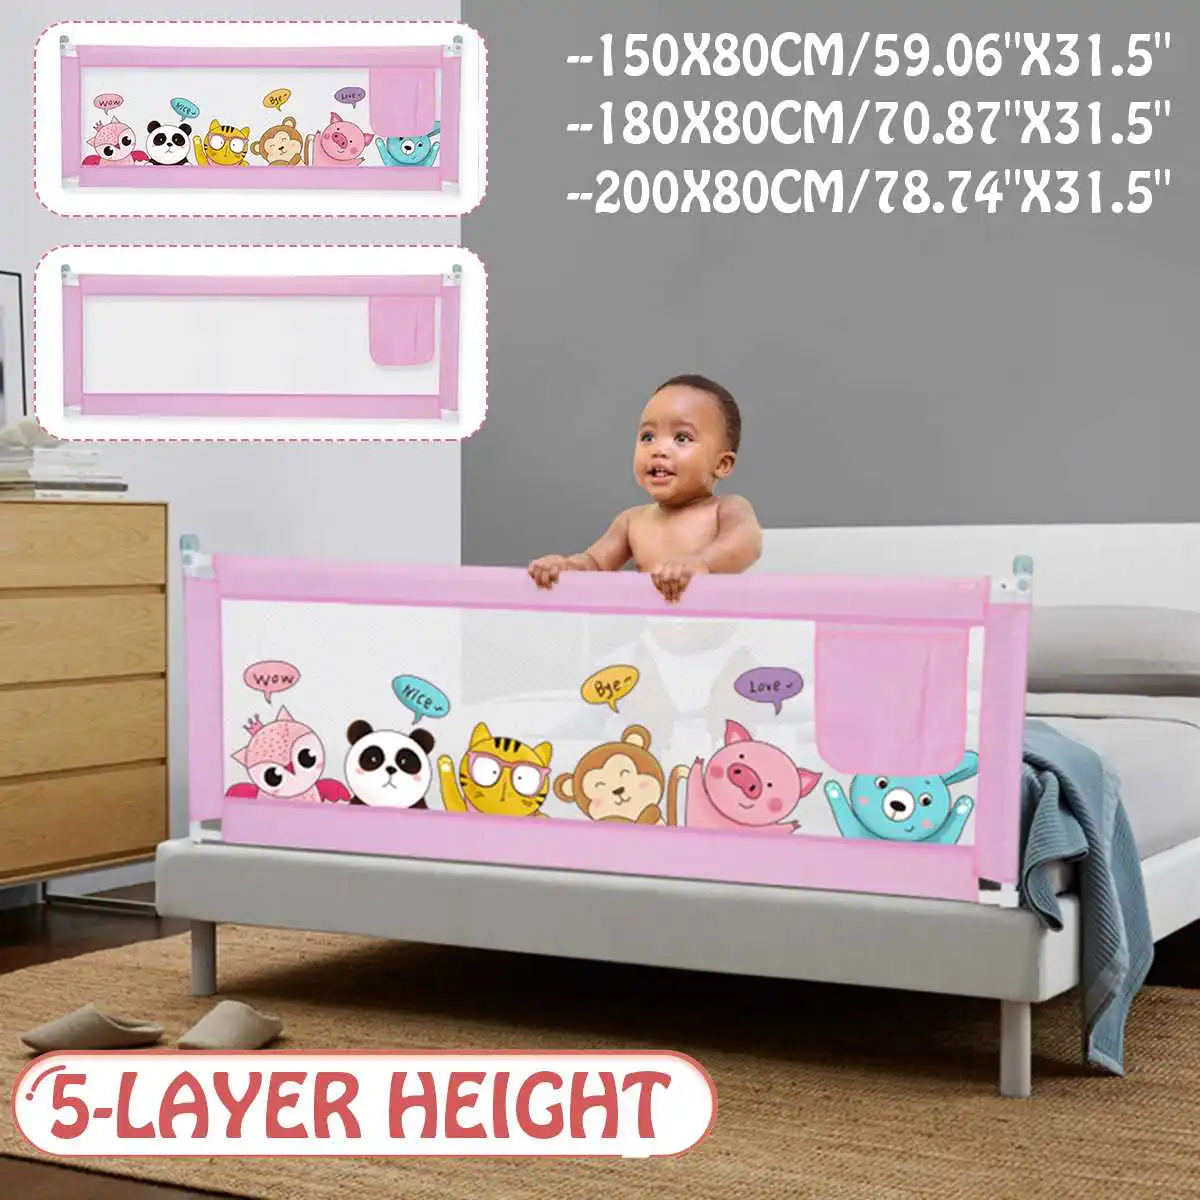 

Children's Bed Barrier Fence Safety Guardrail Security Foldable Baby Home Playpen On Bed Fencing Gate Crib Adjustable Kids Rails